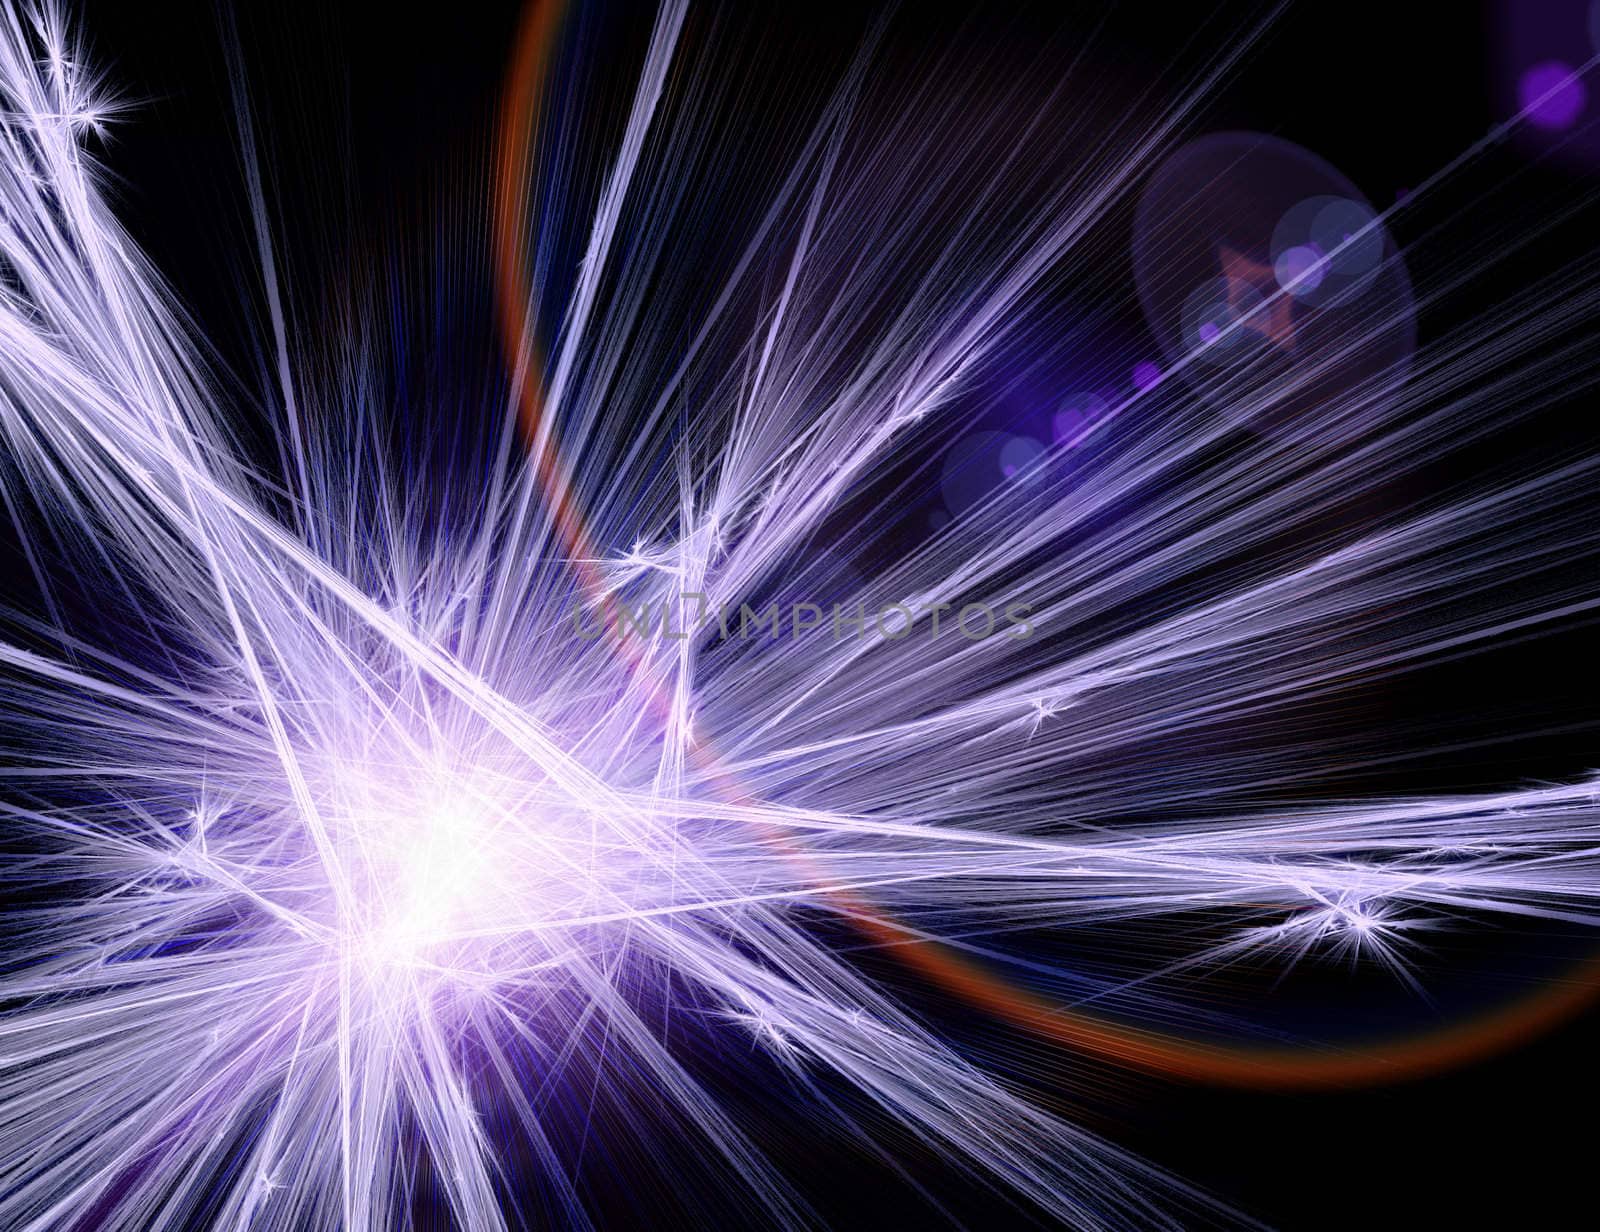 abstract fractal design with lens flare effect